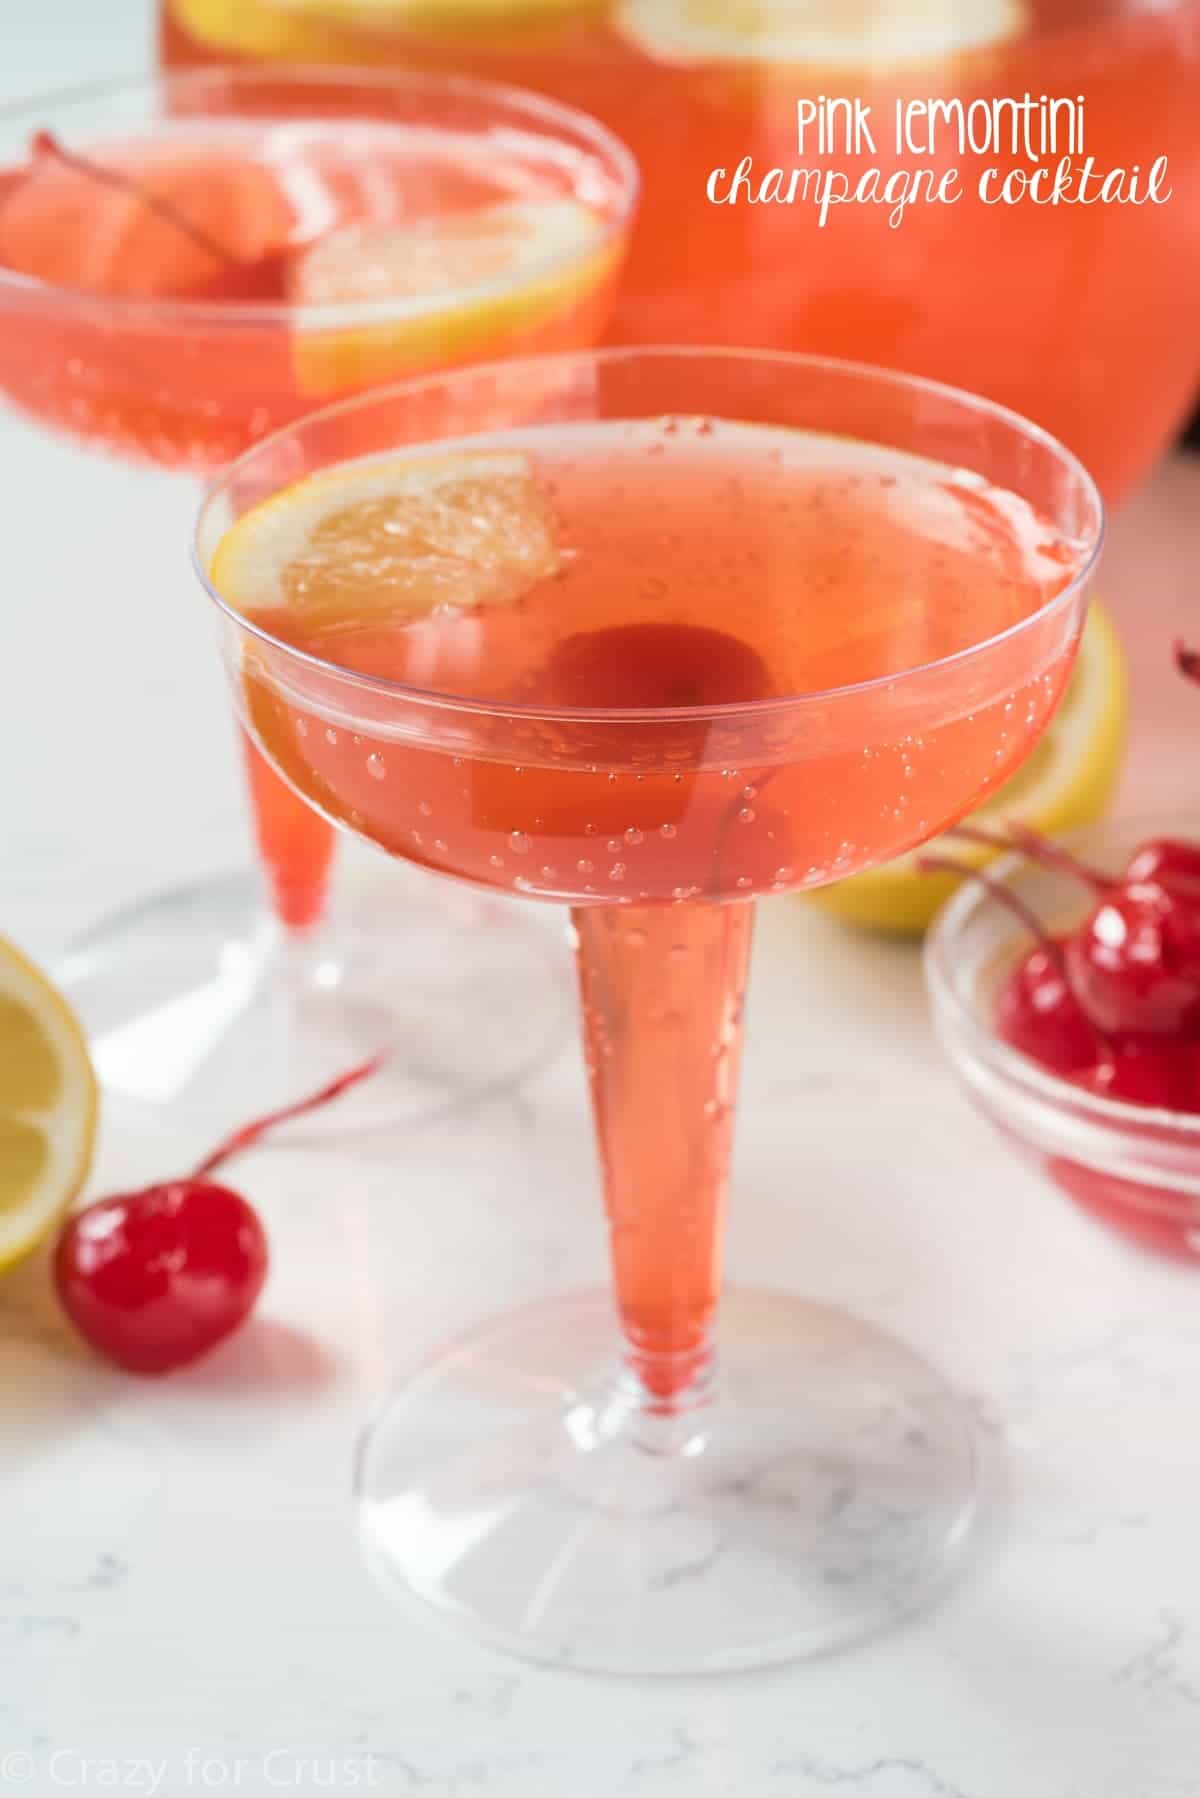 Pink Lemontini Champagne Cocktail - this easy recipe is perfect as a single martini or a party punch!